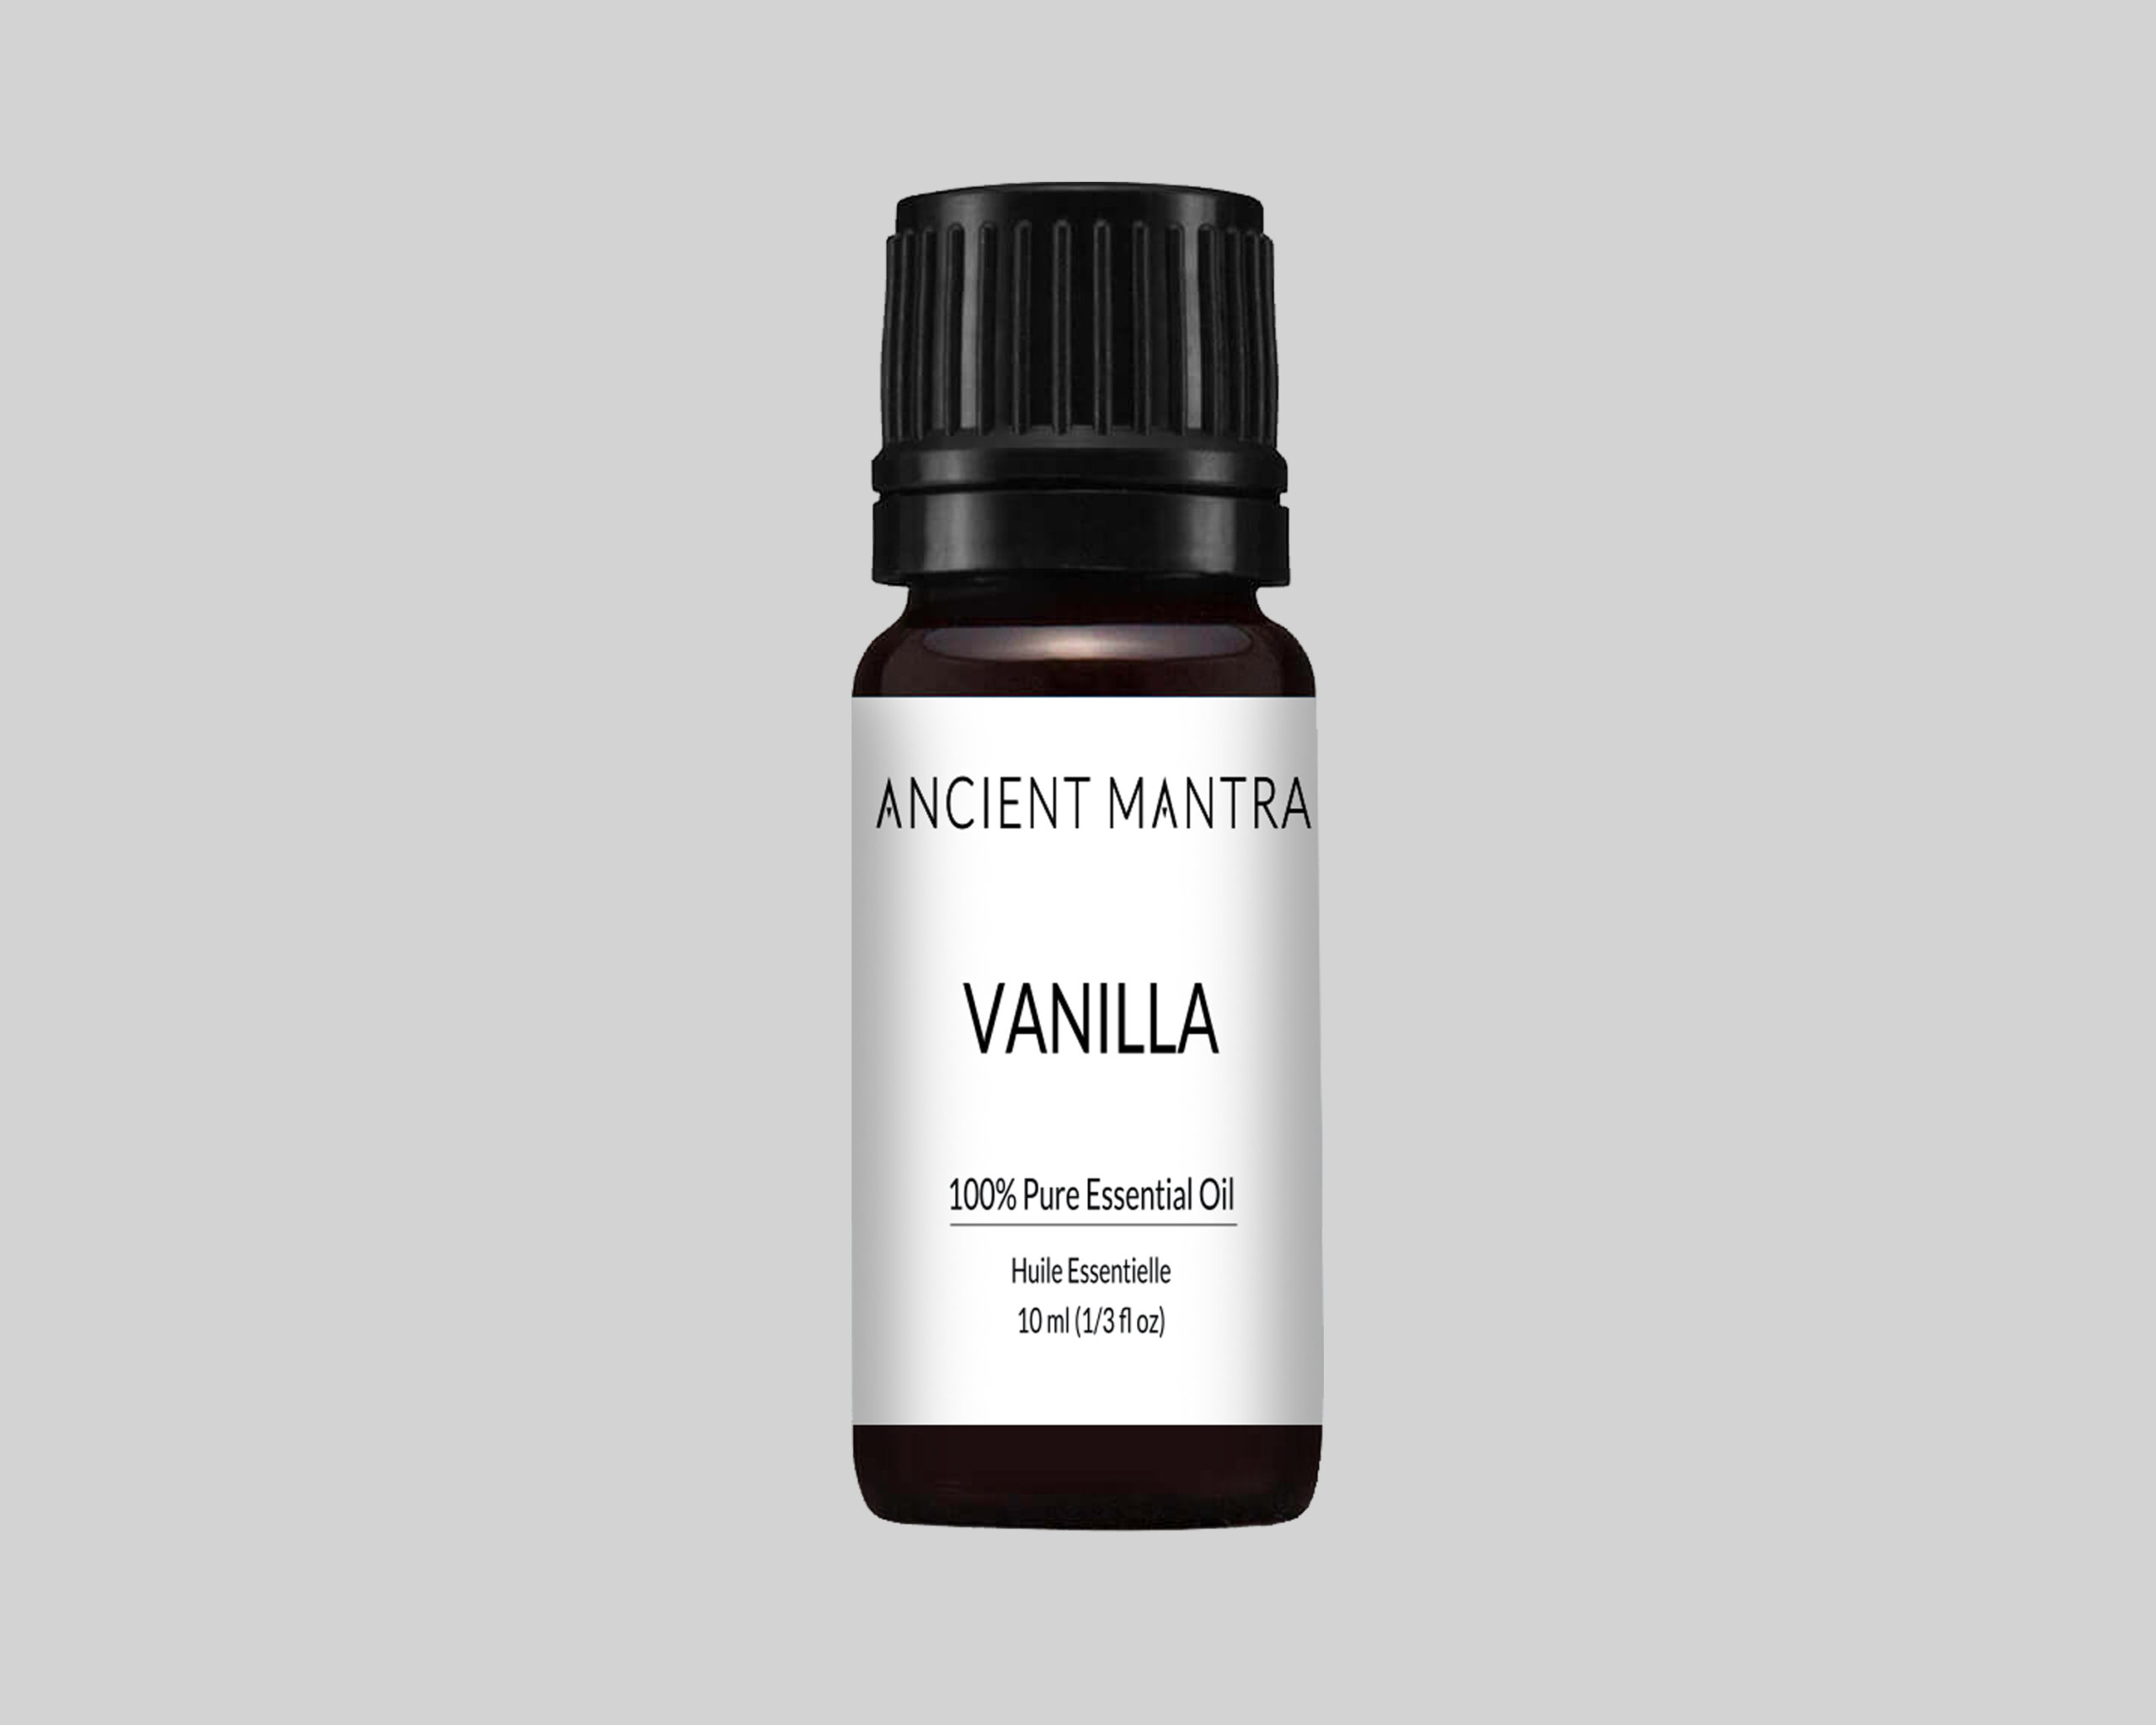 Vanilla Essential Oil - Essential Oils, Diffuser blends, Face Serums  sourced Globally